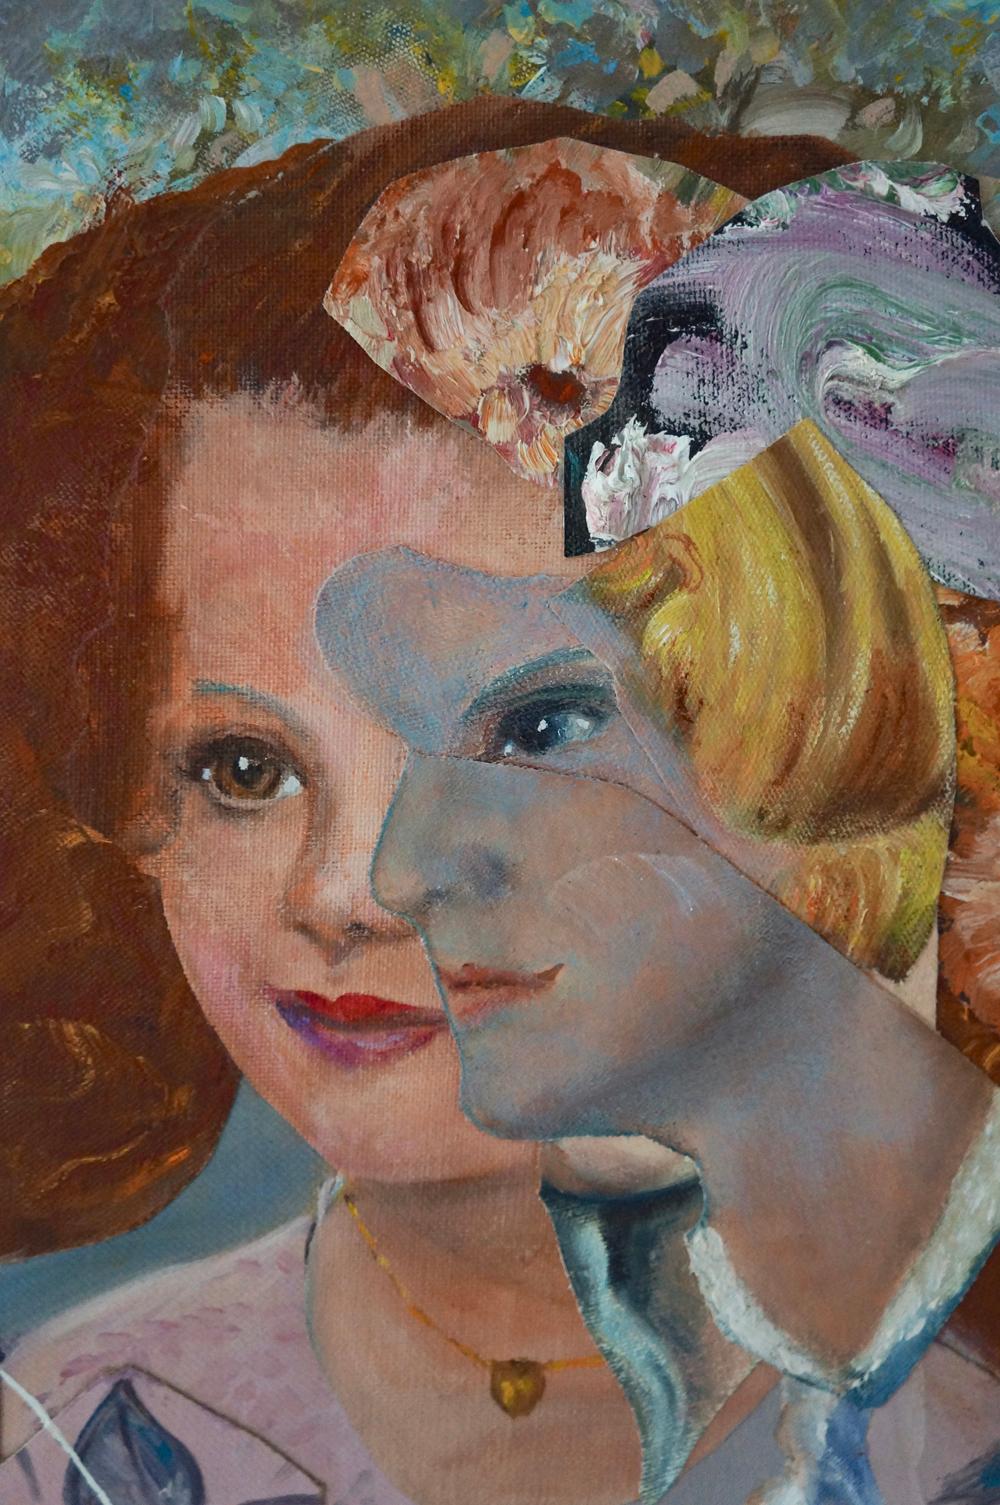 John Baker’s “Young Debutante with a Mask of her Mother”, an acrylic painting with collage on canvas 25 x 21.75 inches in dusty lavenders, blues and pinks, is from the artist’s Mask Series. The painting depicts a privileged ingénue at an informal